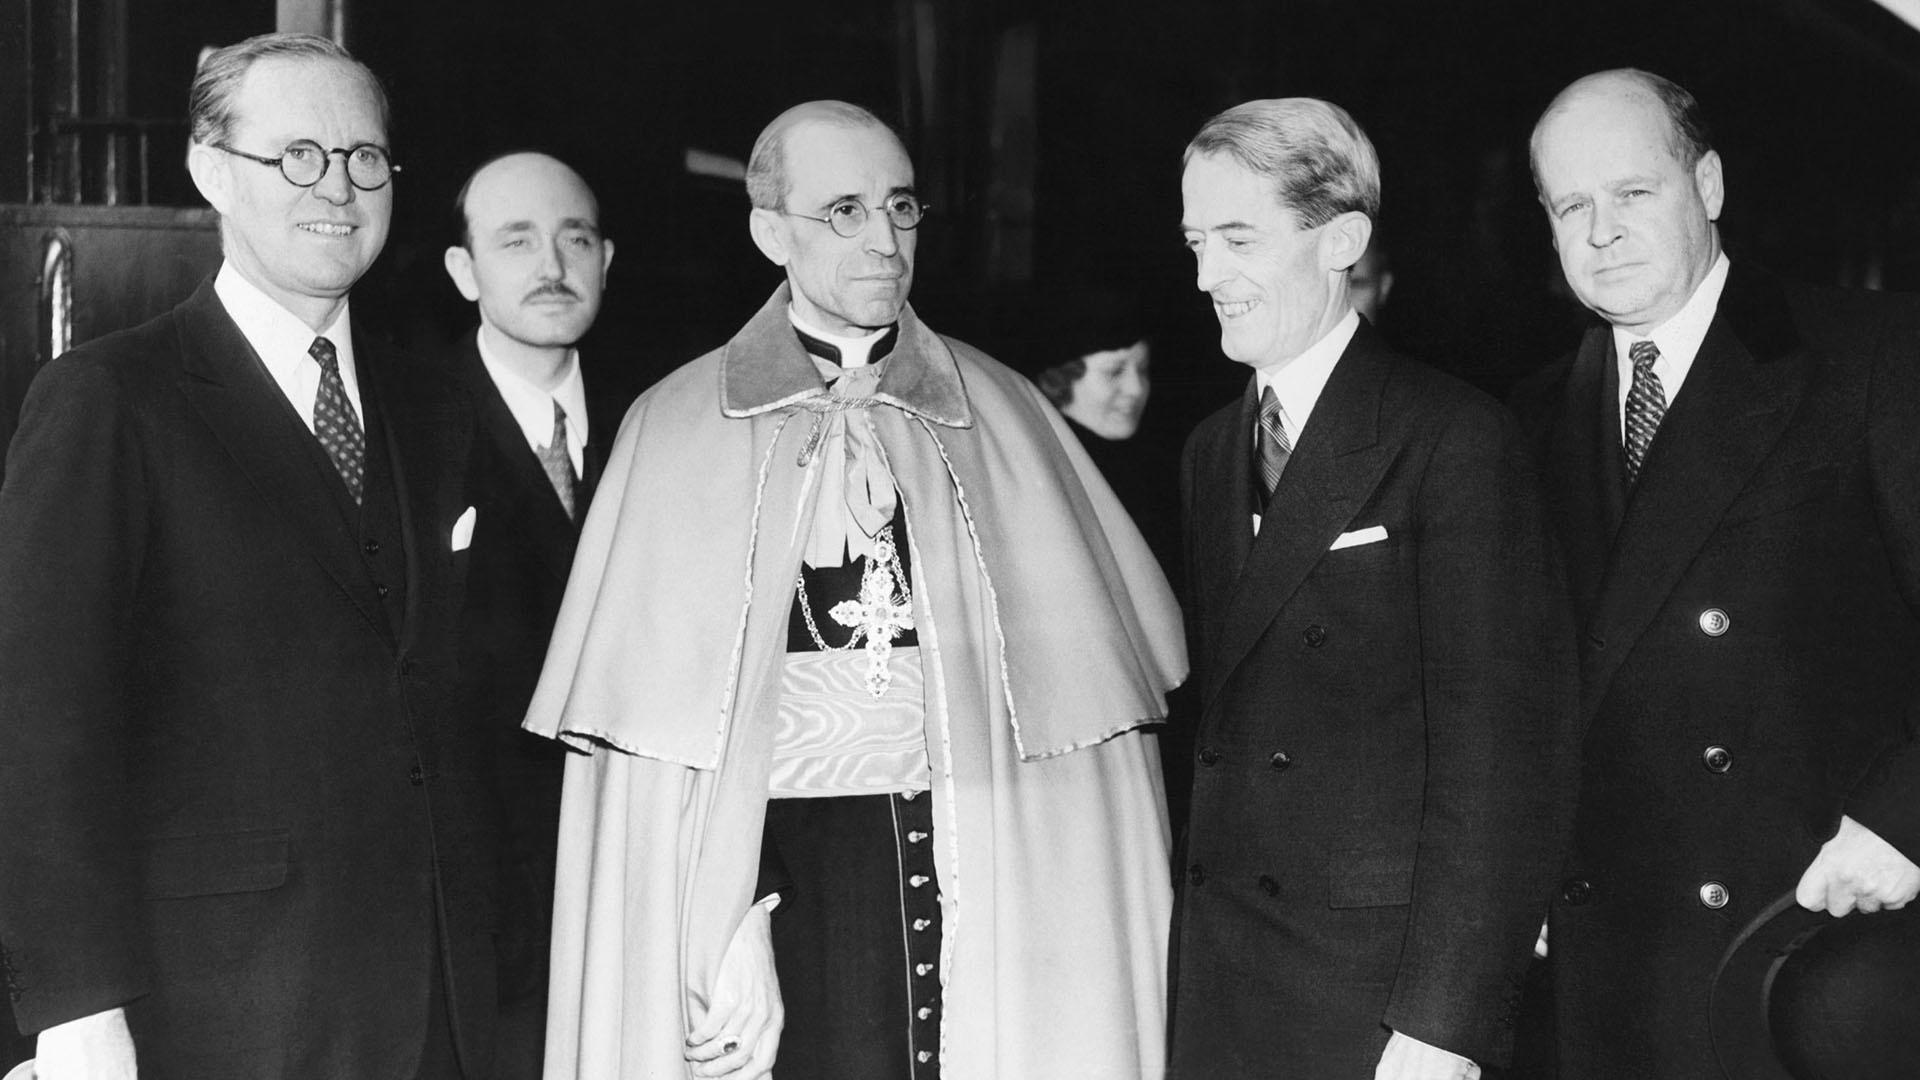 Eugenio Pacelli, Vatican secretary of state prior to becoming Pope Pius XII.